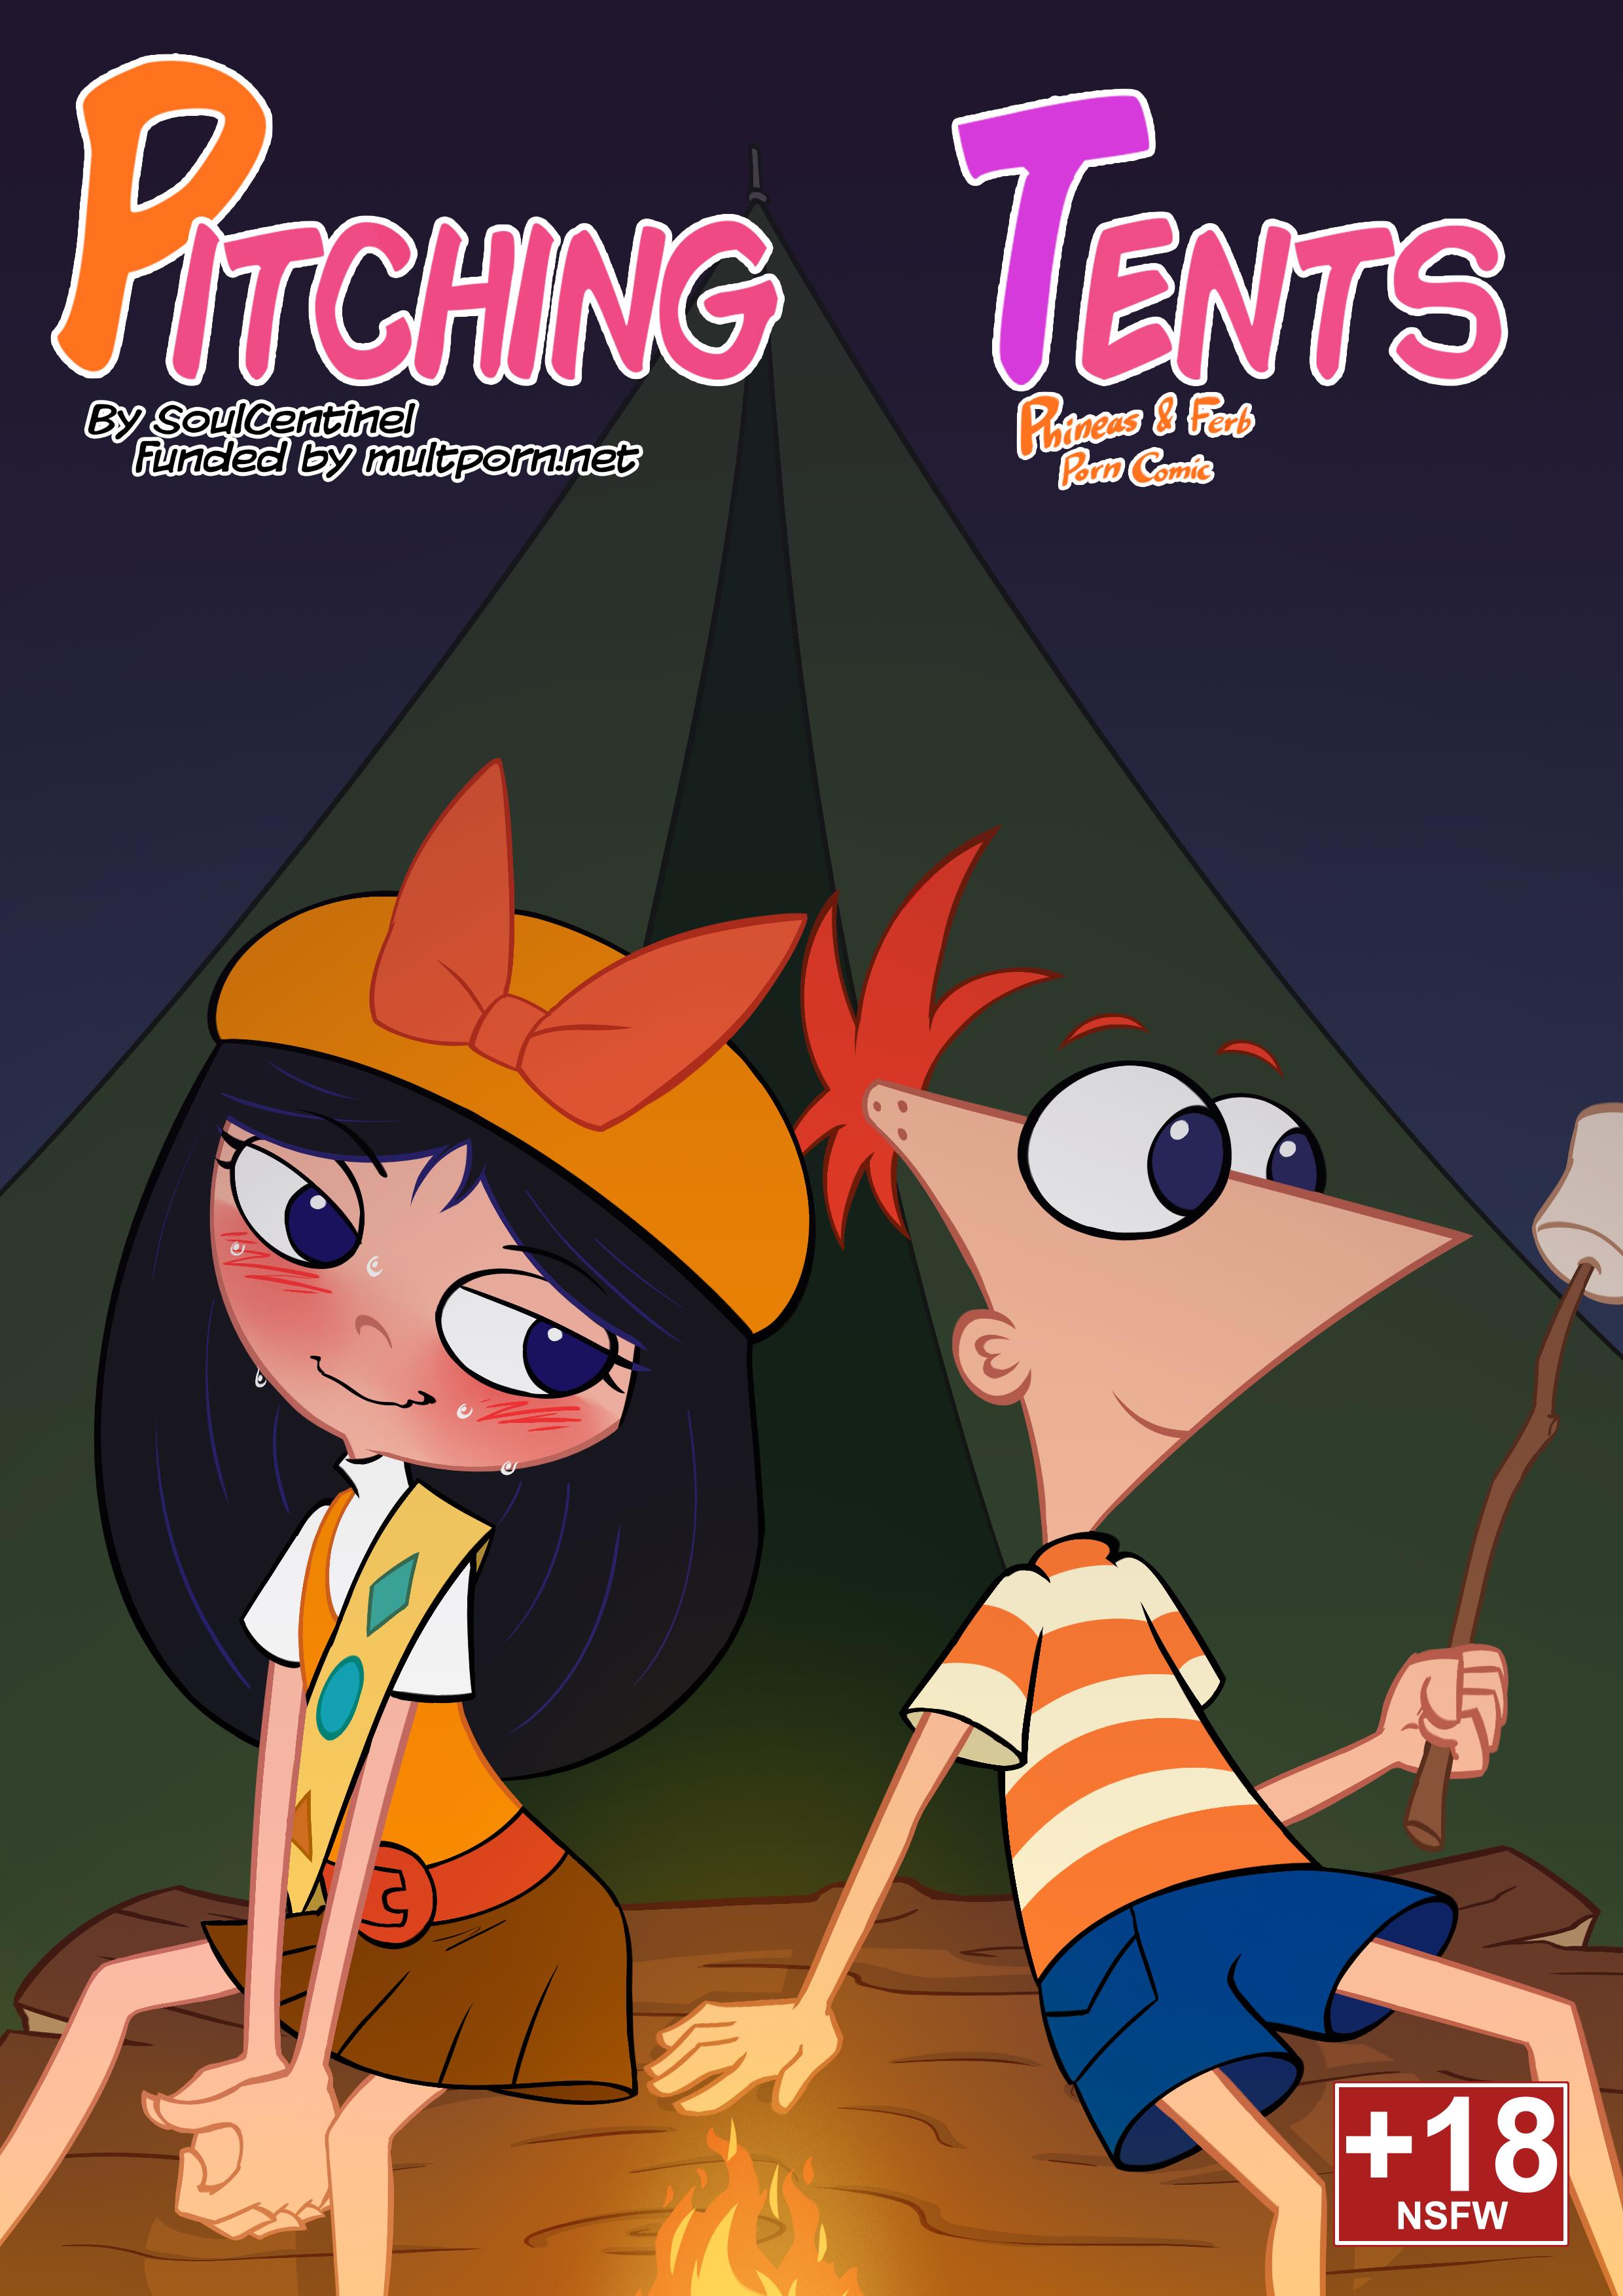 Phineas And Ferb - [Soulcentinel][VioletEchoes] - Pitching Tents xxx |  SureFap